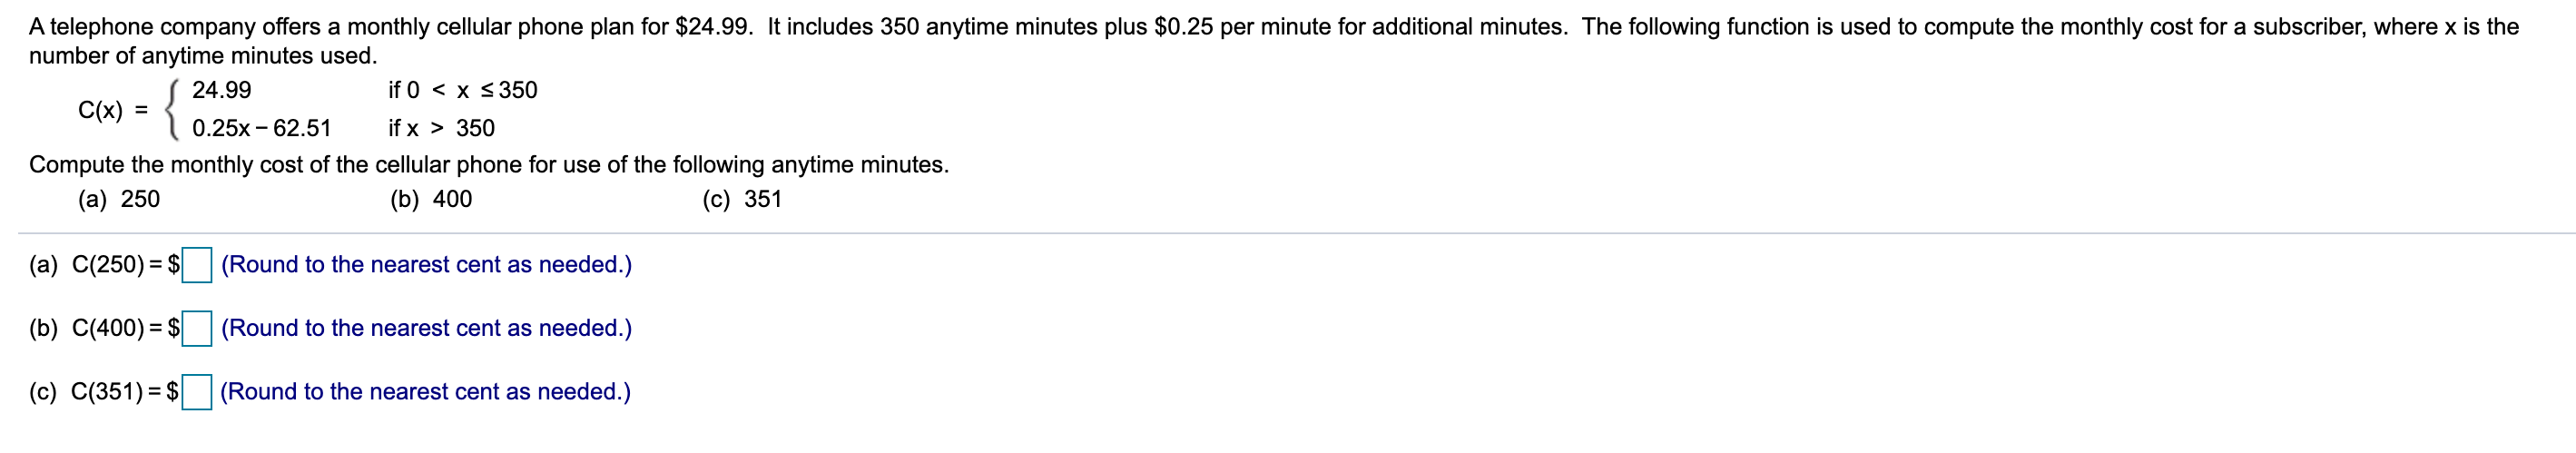 A telephone company offers a monthly cellular phone plan for $24.99. It includes 350 anytime minutes plus $0.25 per minute for additional minutes. The following function is used to compute the monthly cost for a subscriber, where x is the
number of anytime minutes used.
{
24.99
if 0 < x <350
C(x) =
0.25x - 62.51
if x > 350
Compute the monthly cost of the cellular phone for use of the following anytime minutes.
(a) 250
(b) 400
(c) 351
(a) C(250) = $ (Round to the nearest cent as needed.)
(b) C(400) = $
(Round to the nearest cent as needed.)
(c) C(351) = $
(Round to the nearest cent as needed.)
